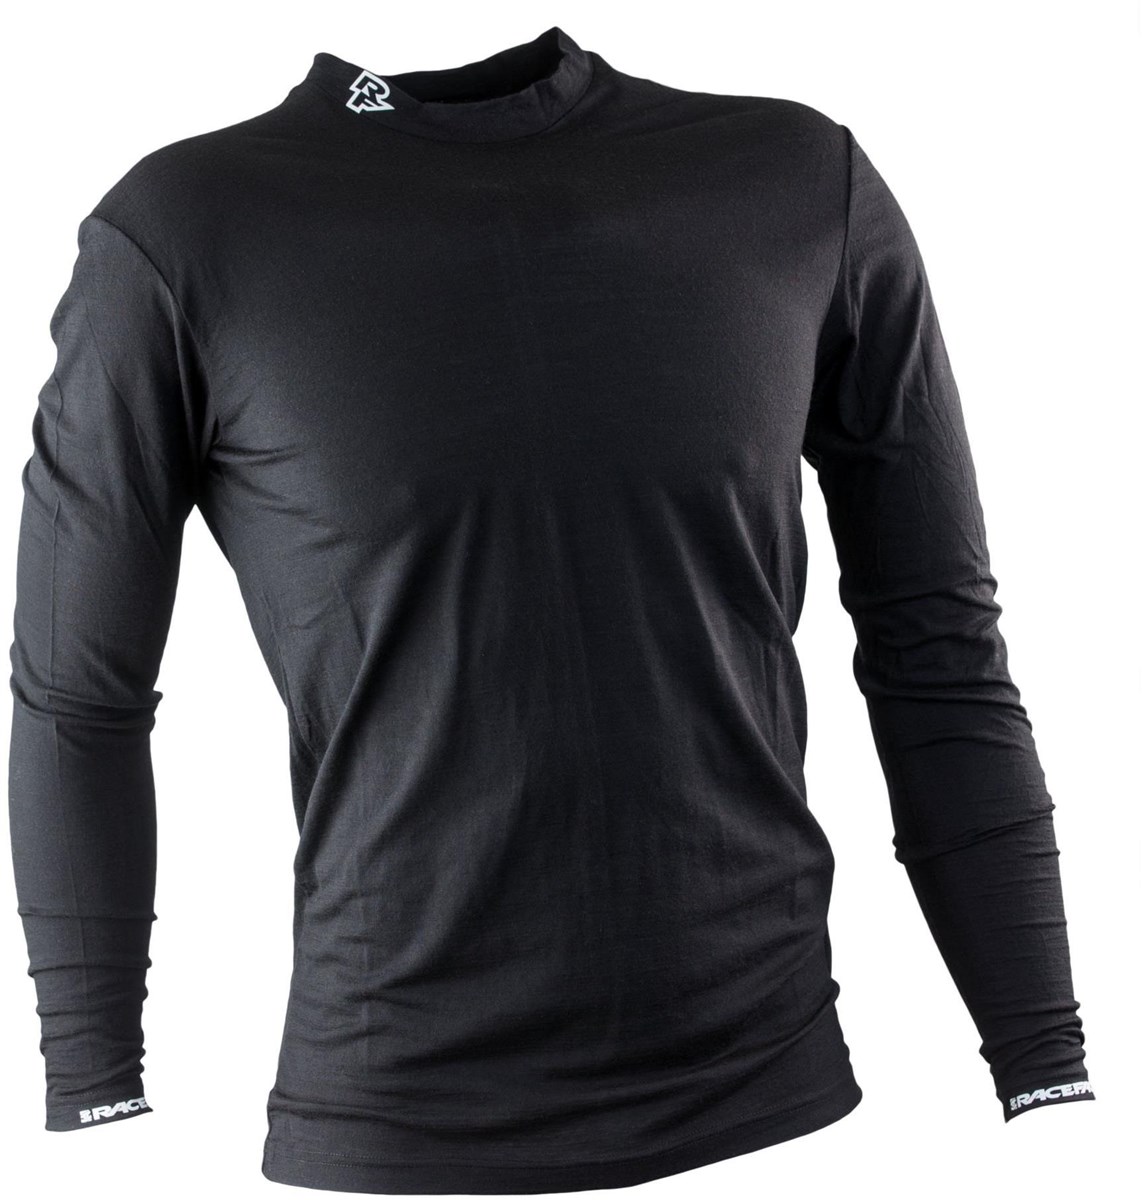 Race Face Stark Wool Long Sleeve Cycling Base Layer product image